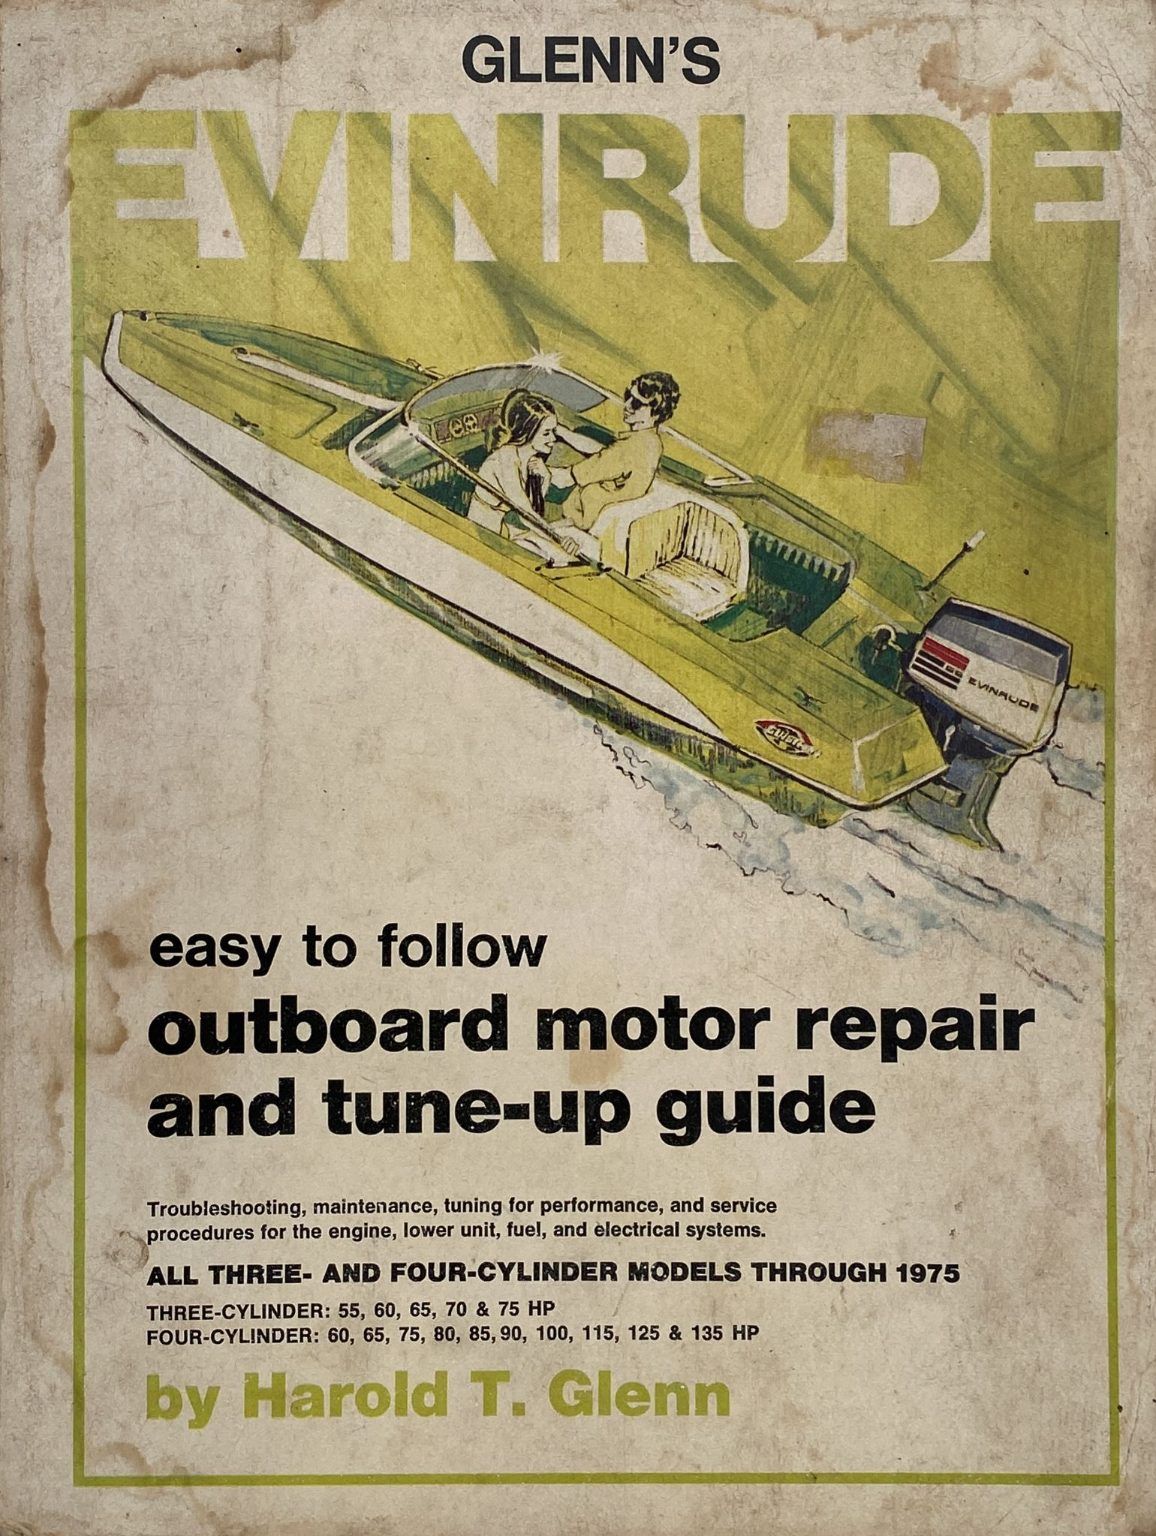 EVINRUDE OUTBOARD Repair and Tune up Guide